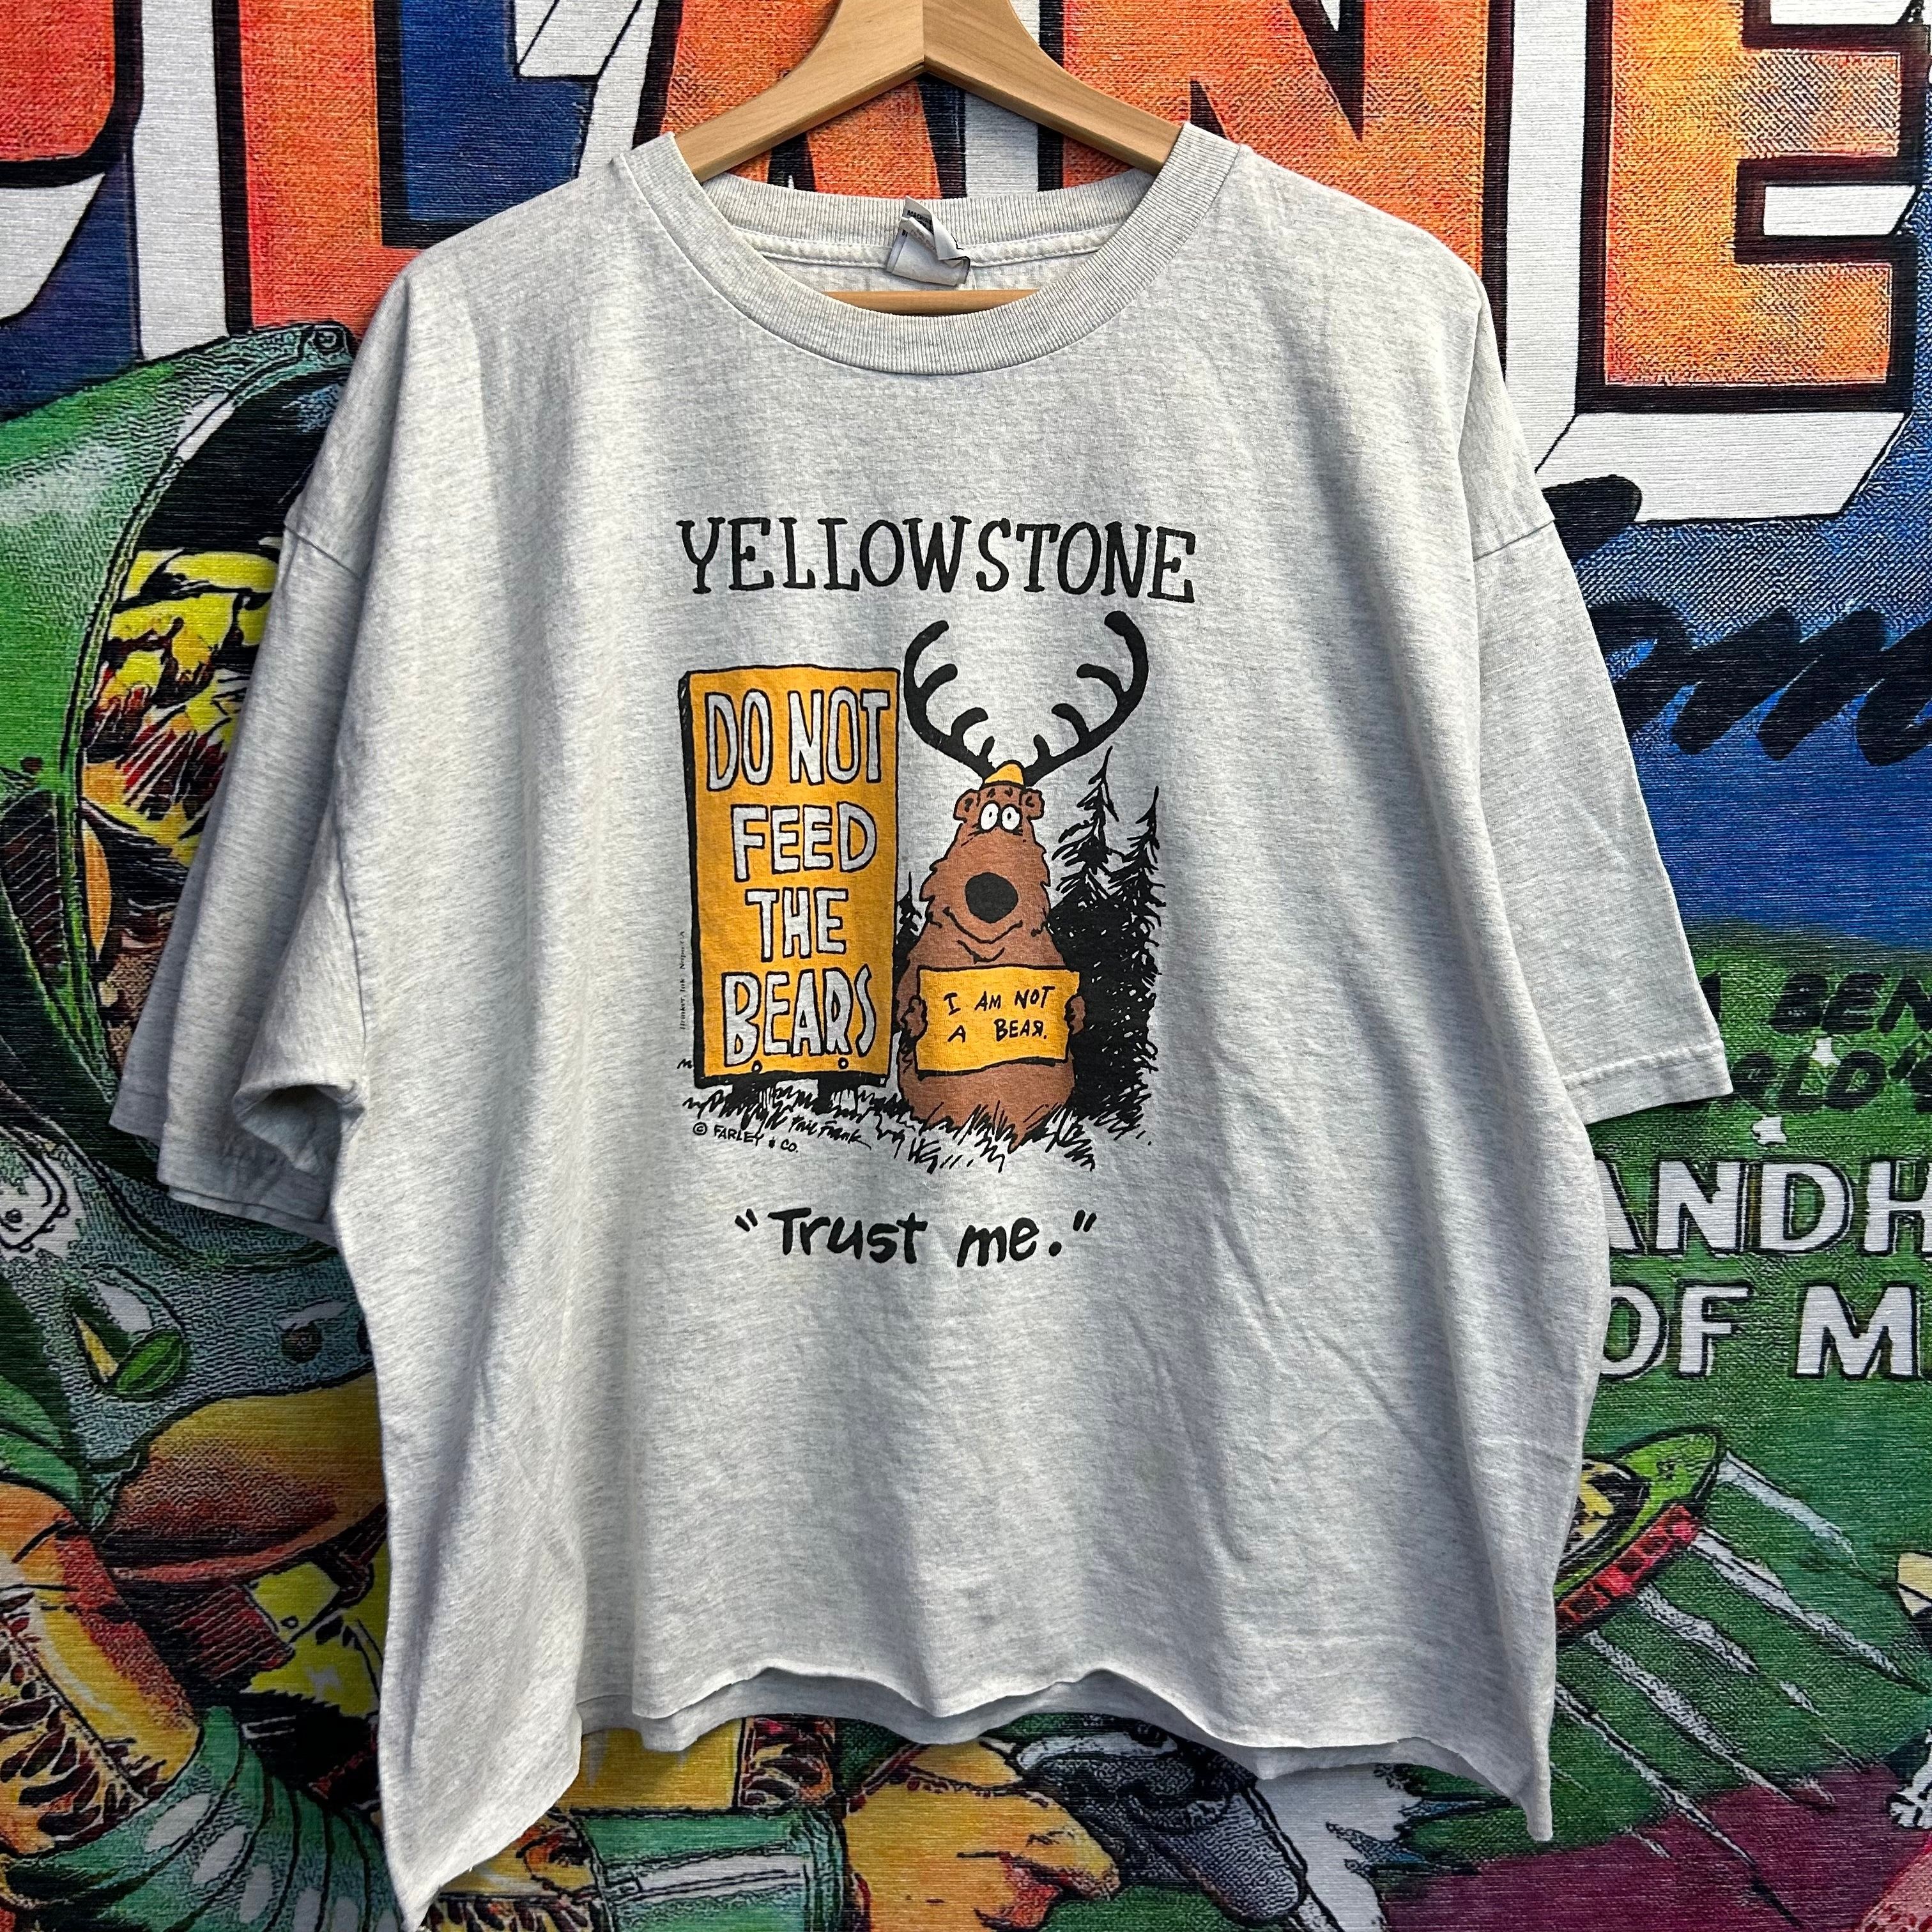 Vintage Vintage 90’s Yellowstone National Park Tee Size Large Size US L / EU 52-54 / 3 - 1 Preview